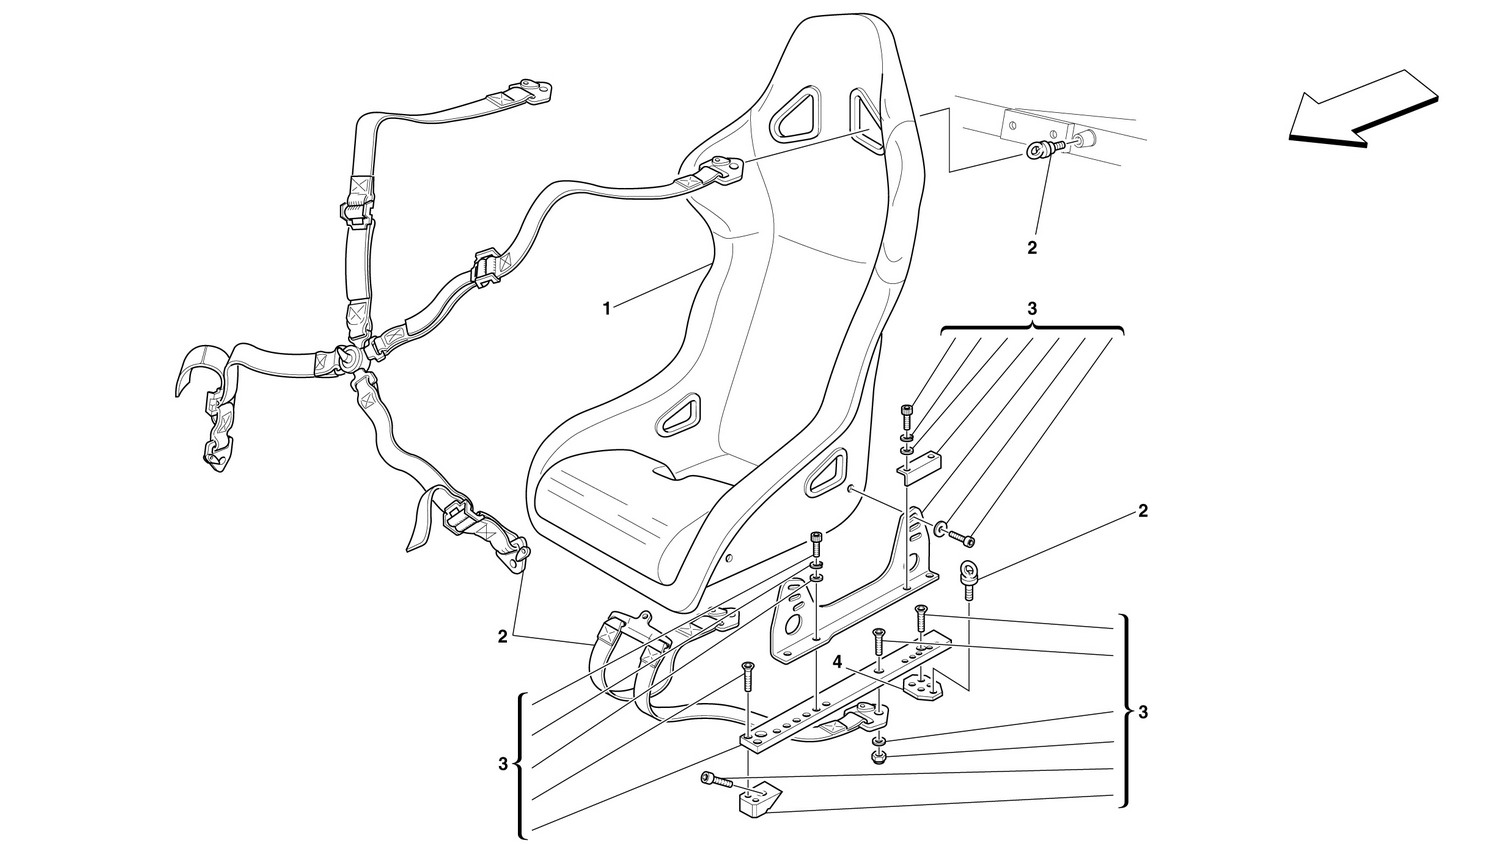 Schematic: Seat And Safety Belts